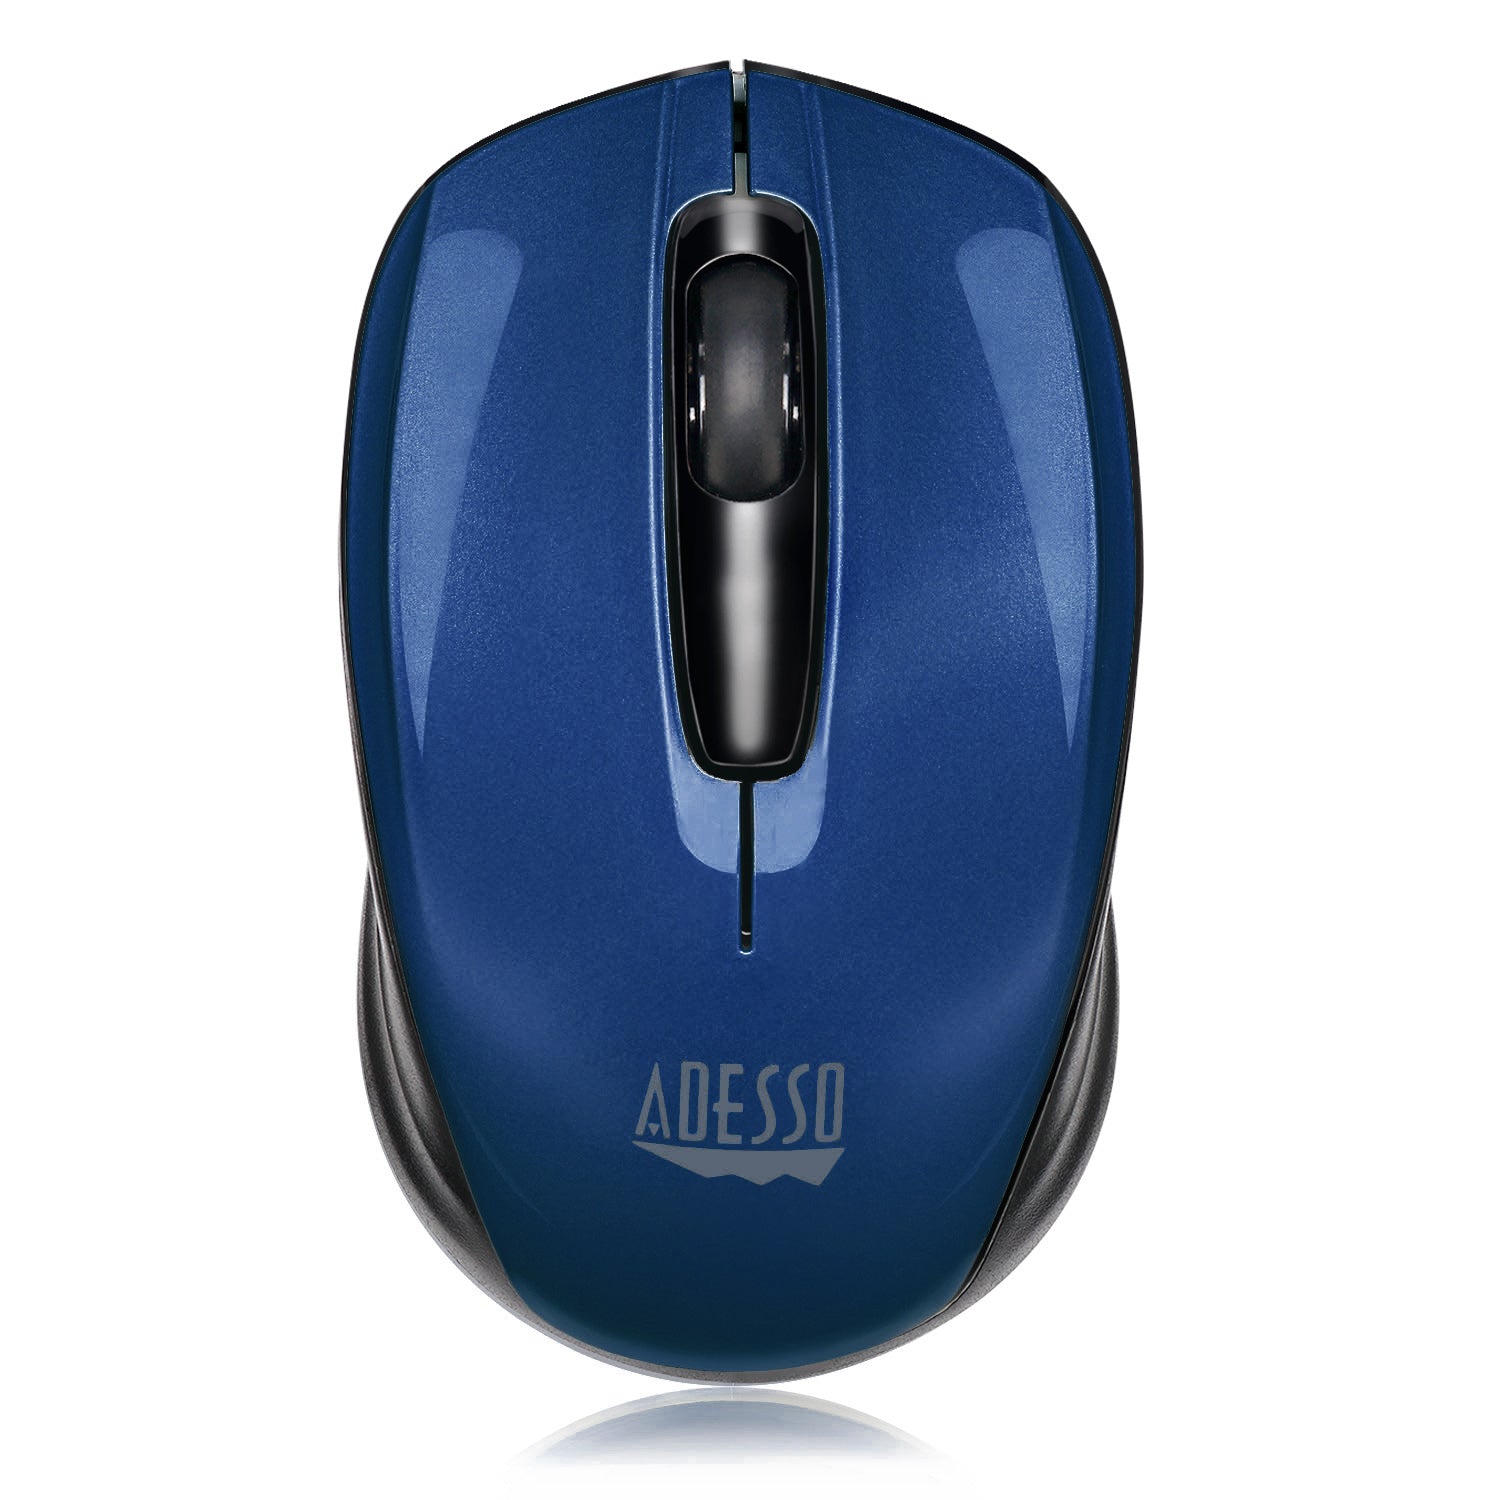 iMouse S50L - 2.4GHz Wireless Mini Mouse